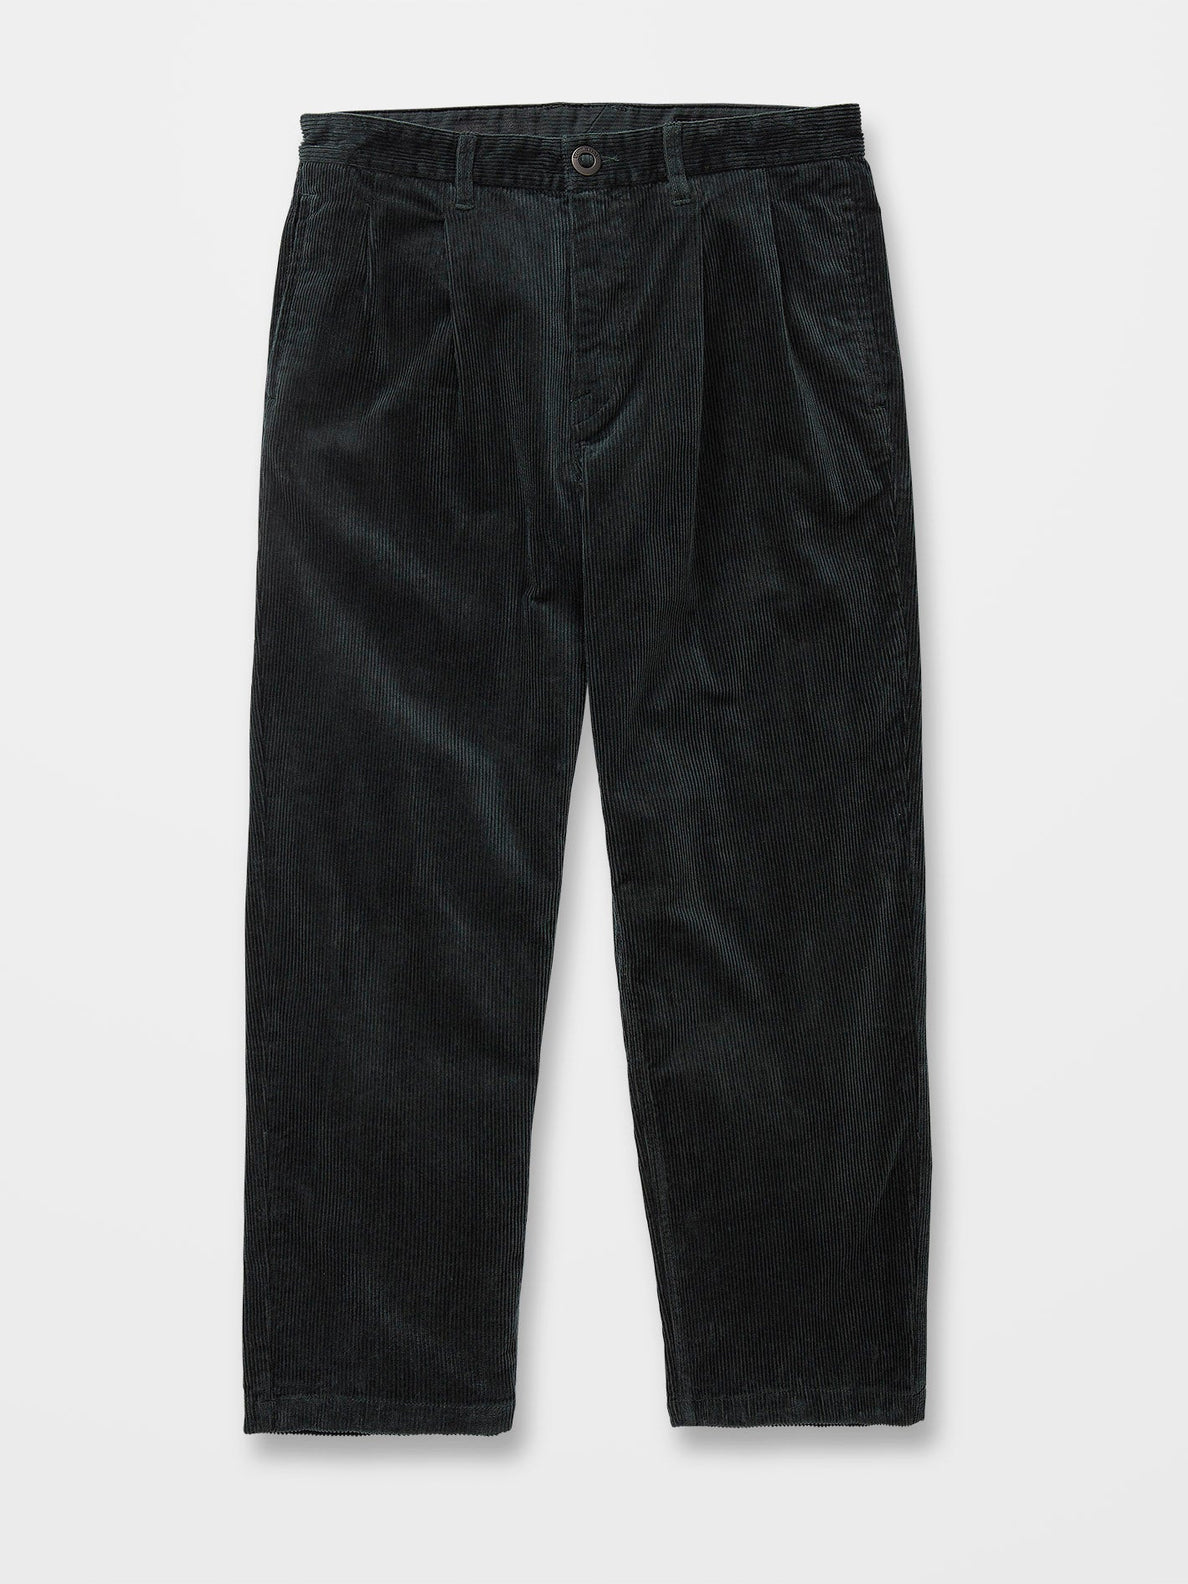 Louie Lopez Tapered Corduroy Trousers - CEDAR GREEN (A1132206_CDG) [8]